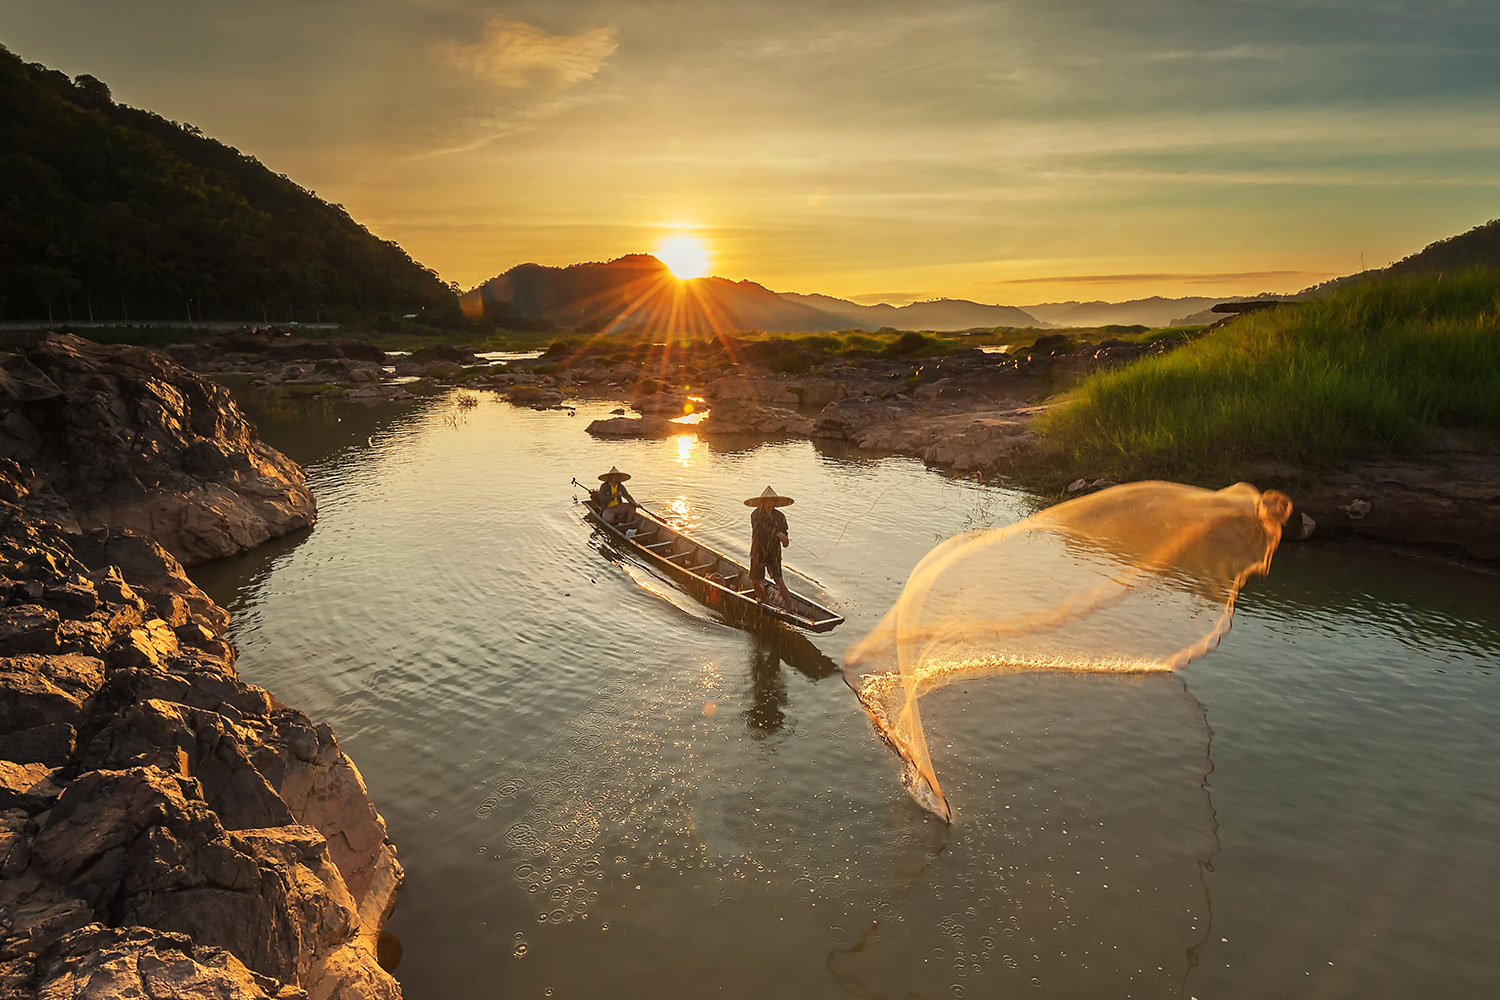 Fisherman throwing his net at sunrise on a tributory of the Mekong river.